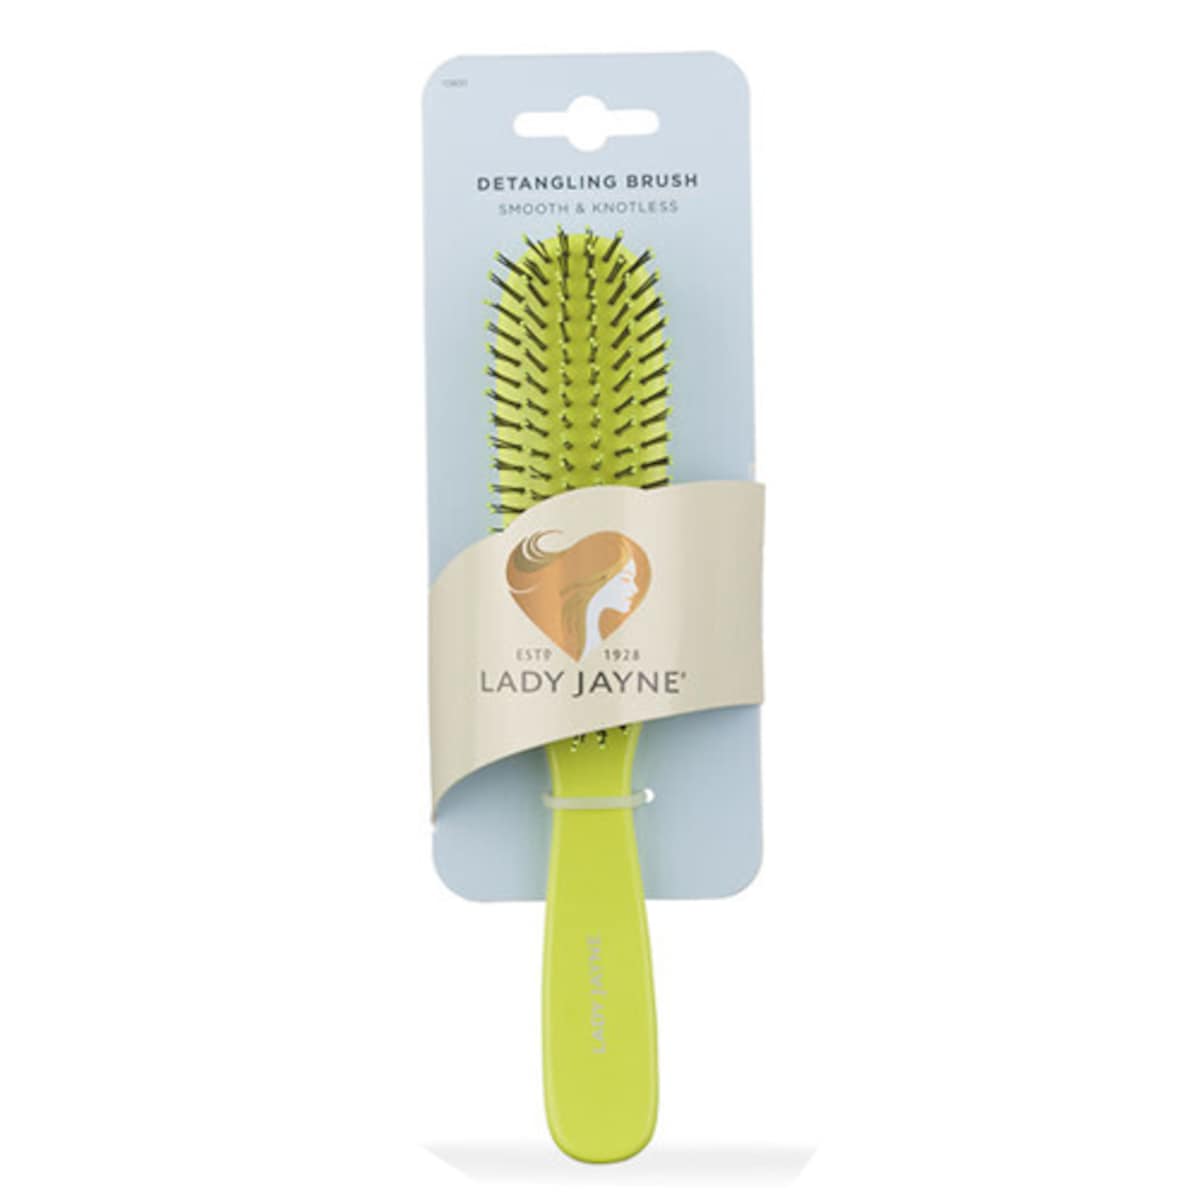 Lady Jayne Smooth & Knotless Detangling Brush Large (Colours selected at random)